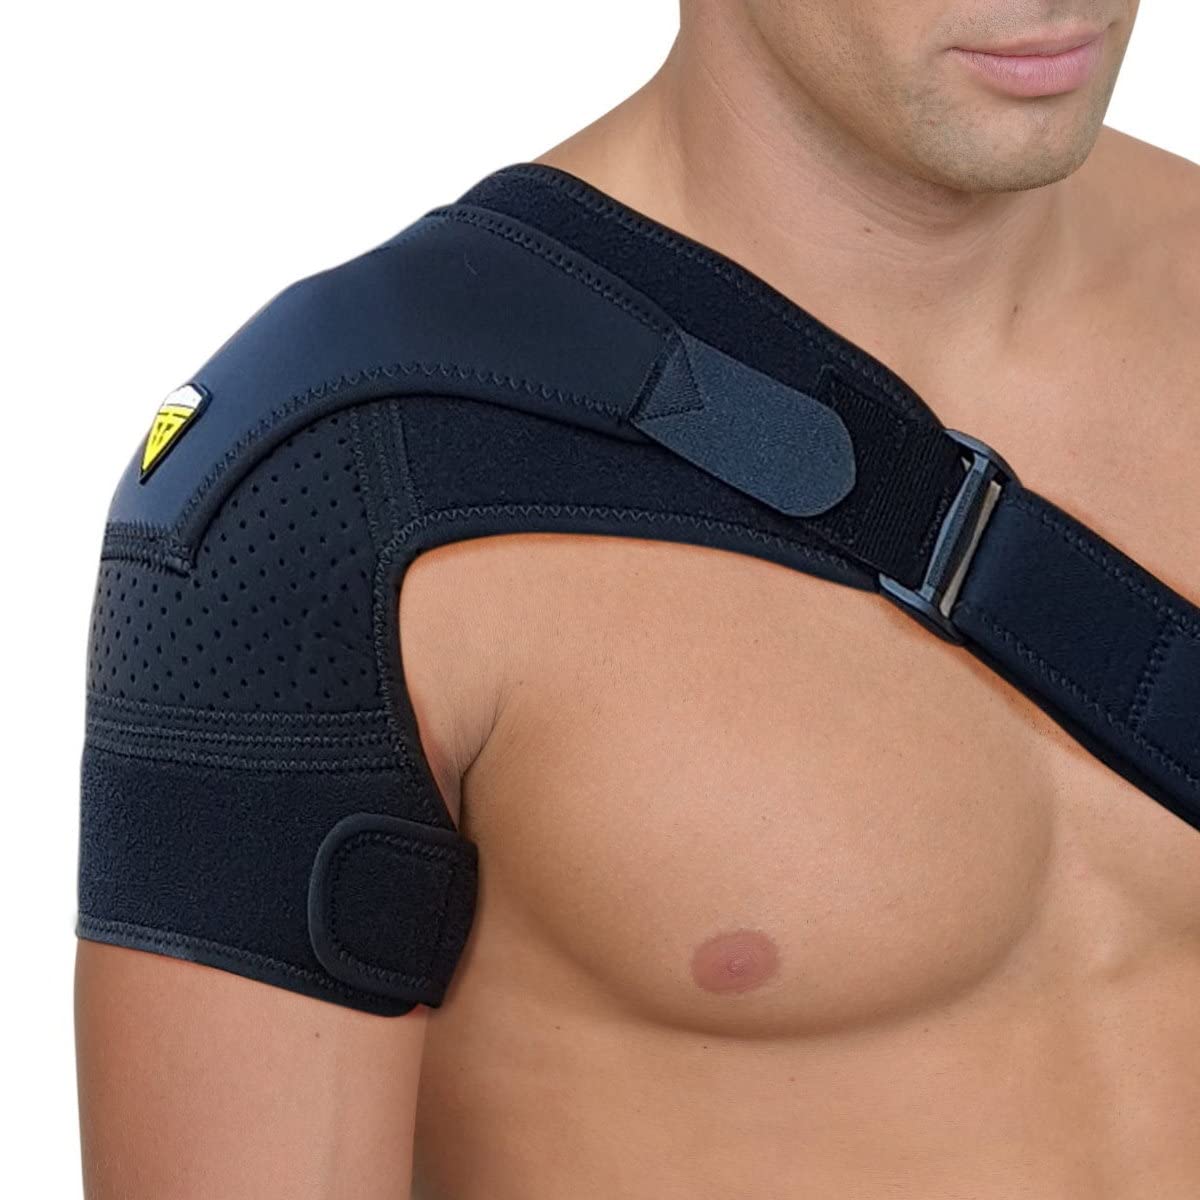 Shoulder Brace for Torn Rotator Cuff - 4 Sizes - Shoulder Pain Relief,  Support and Compression - Sleeve Wrap